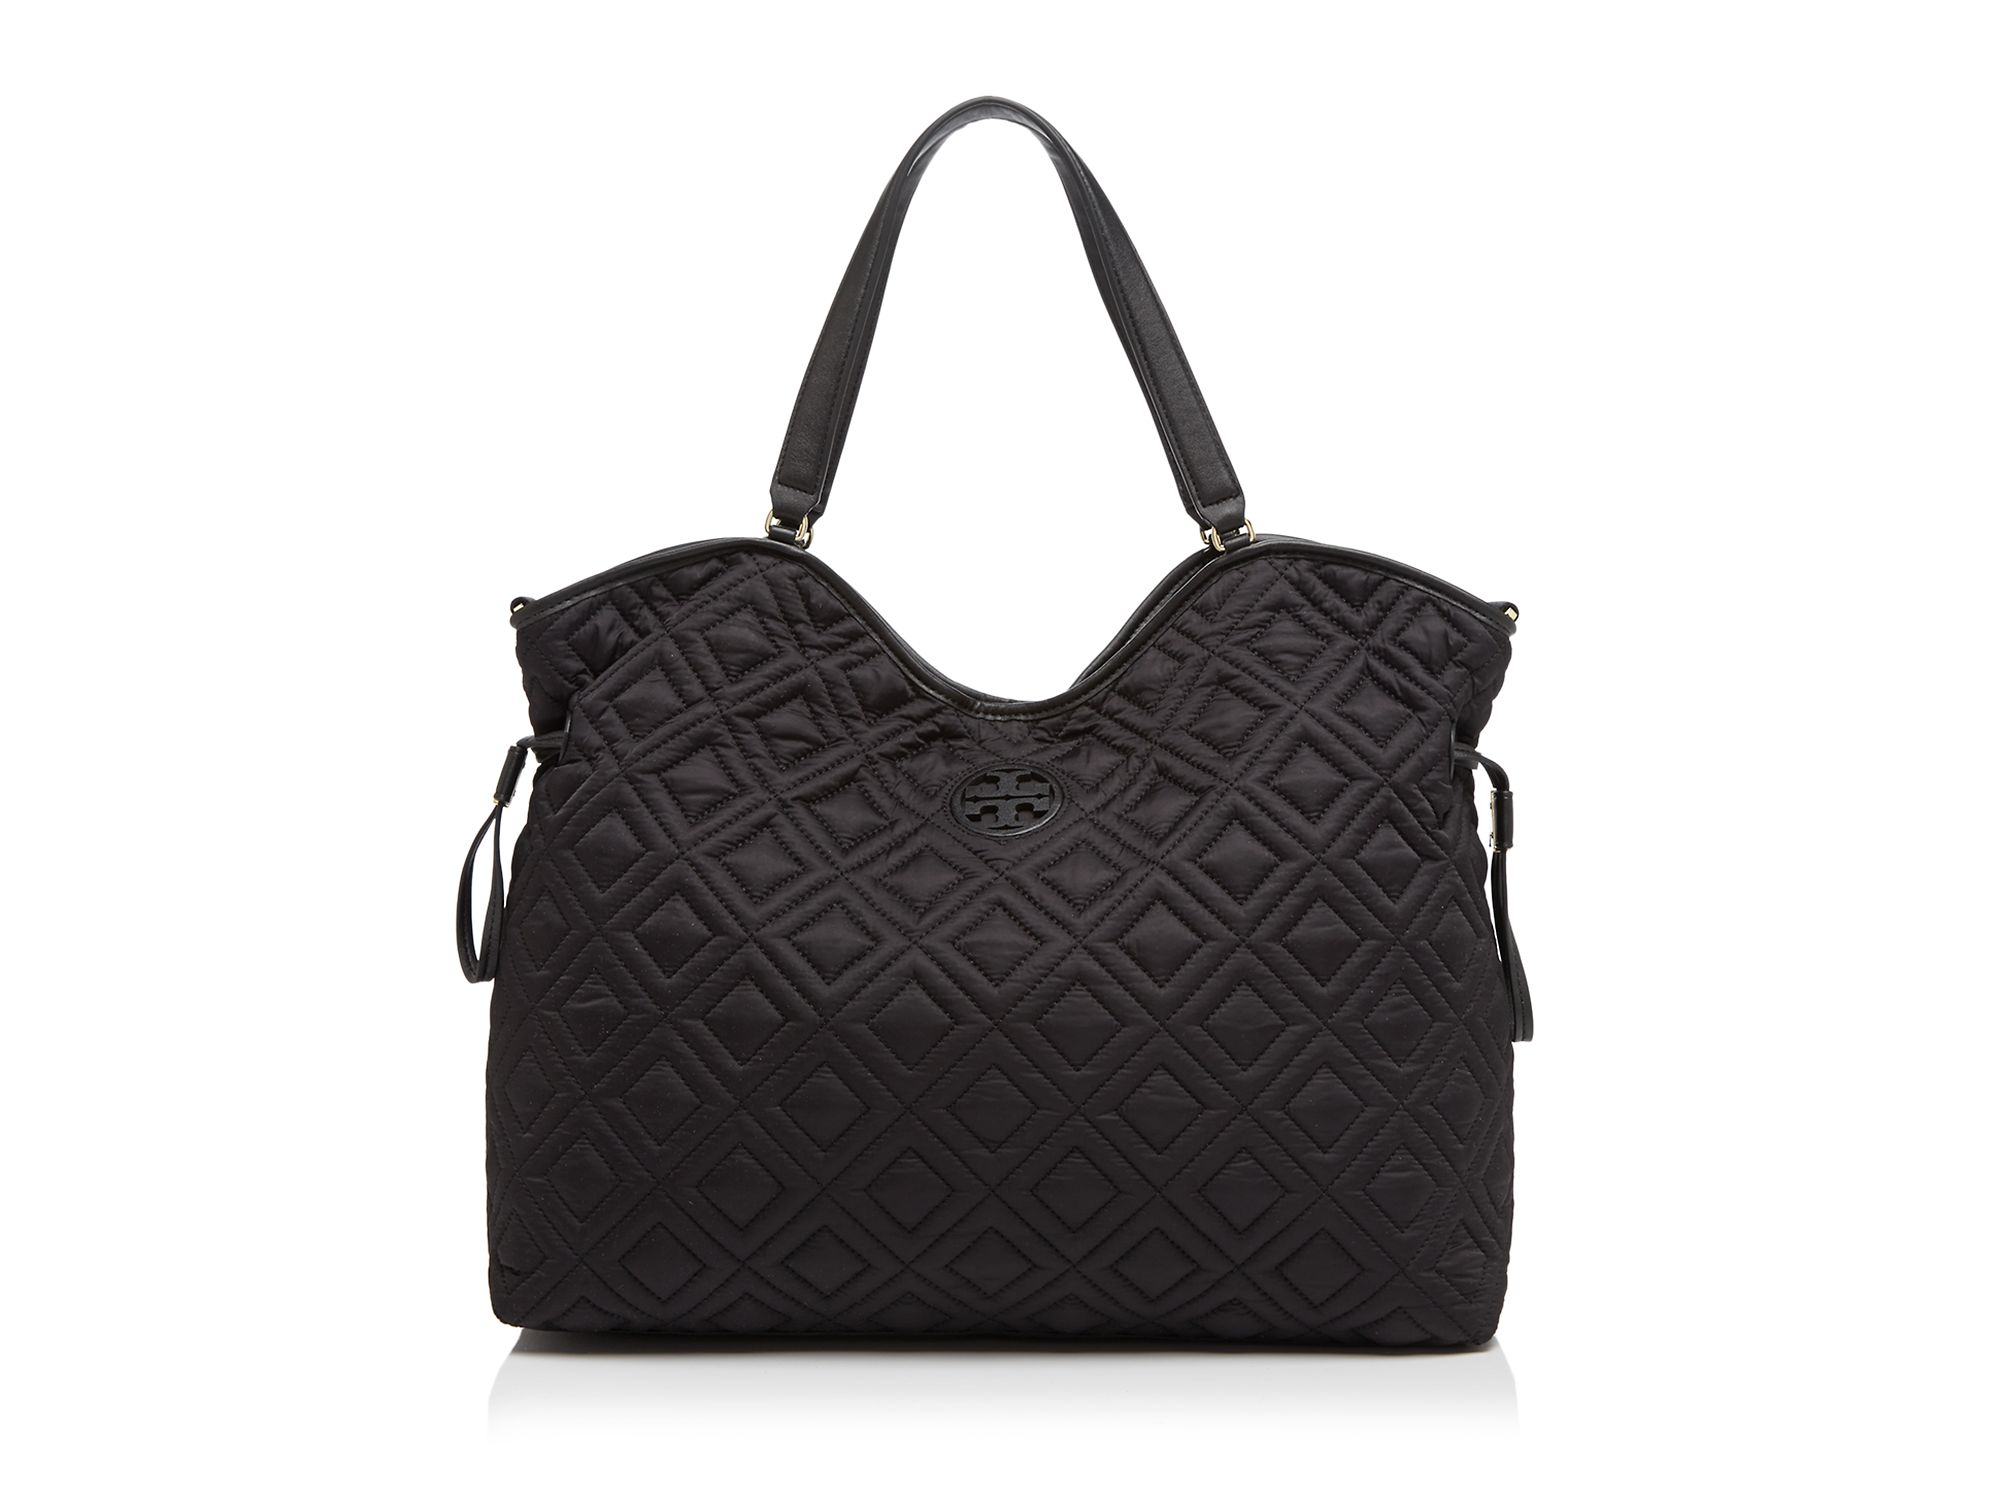 Tory burch Diaper Bag - Quilted Slouchy in Black | Lyst